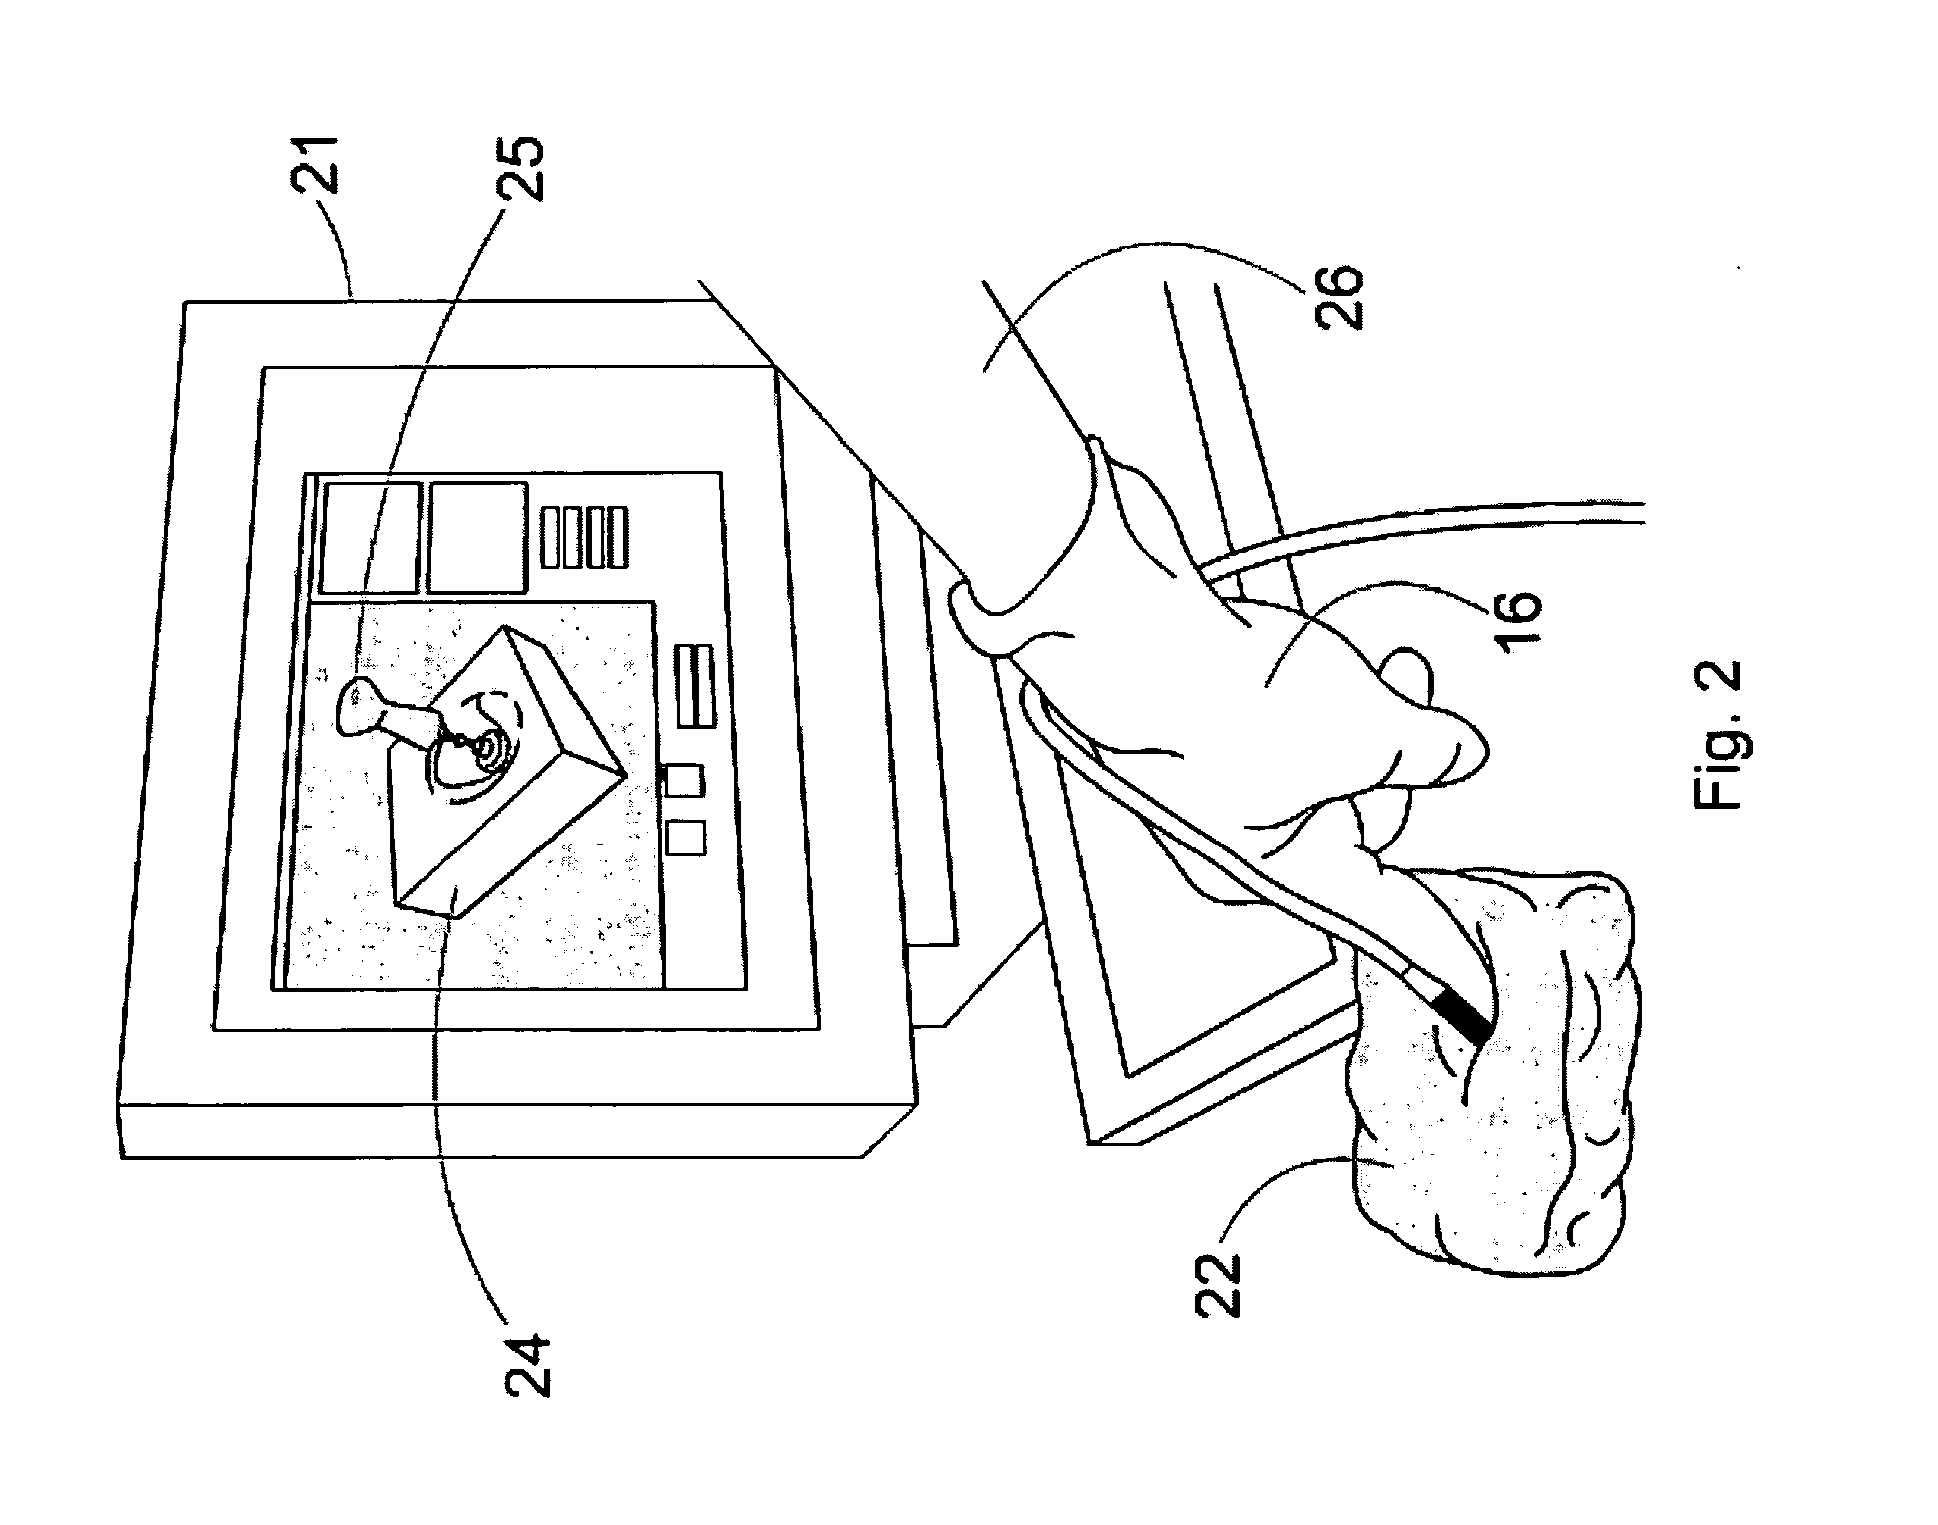 System for interfacing between an operator and a virtual object for computer aided design applications